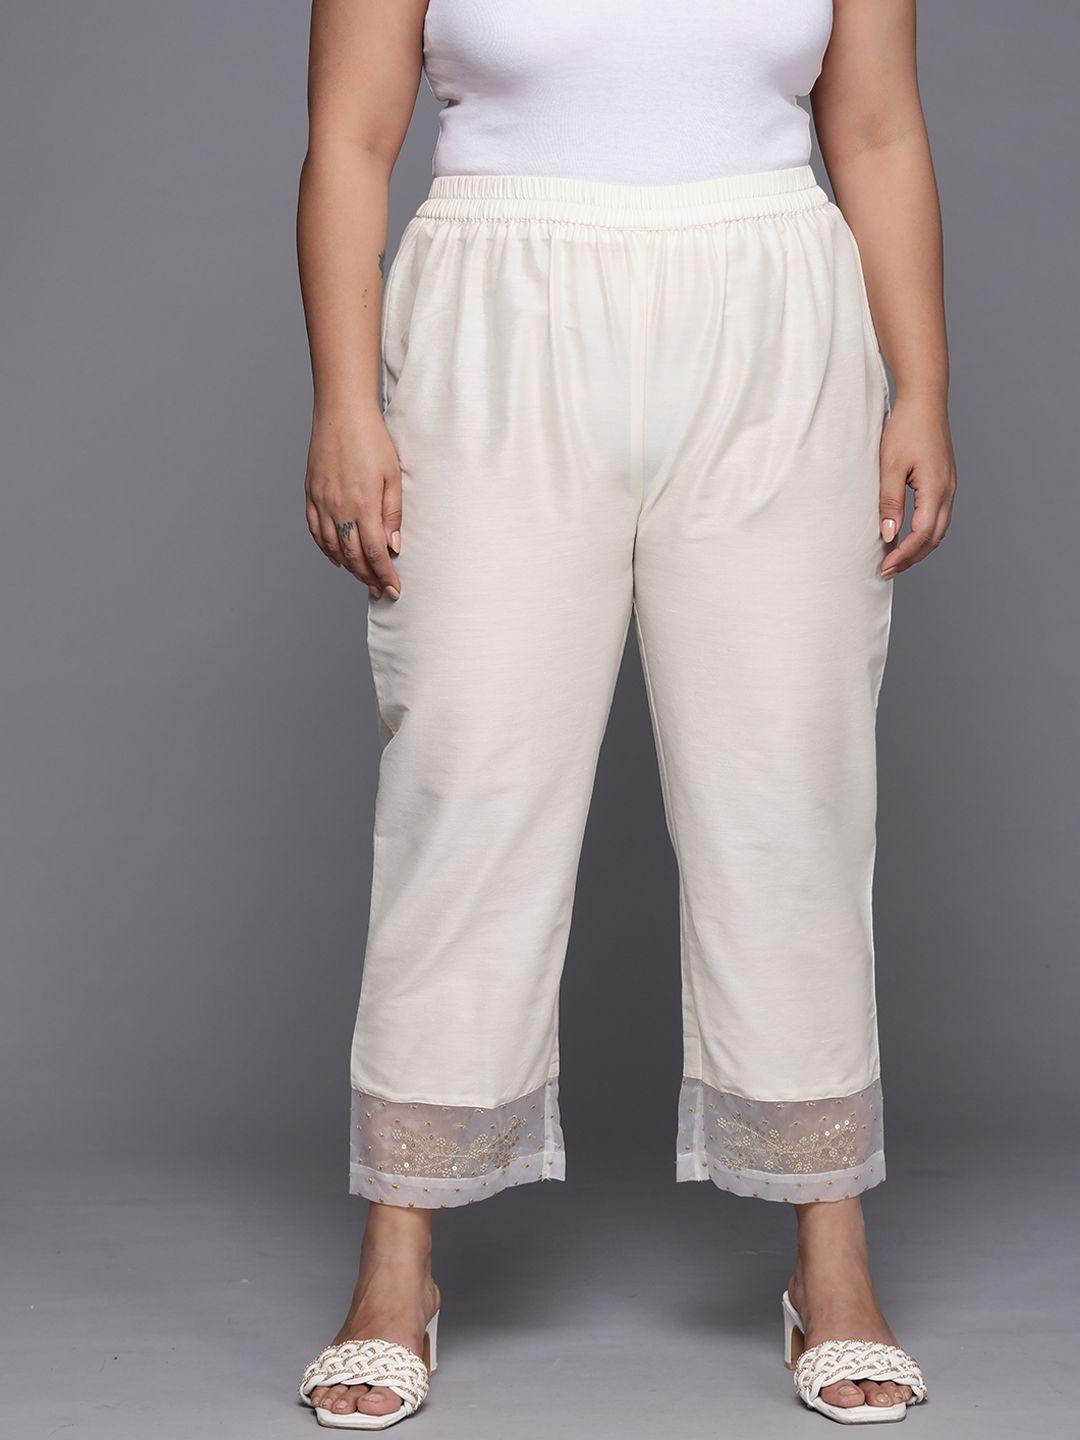 varanga women plus size off white floral embroidered cropped trousers